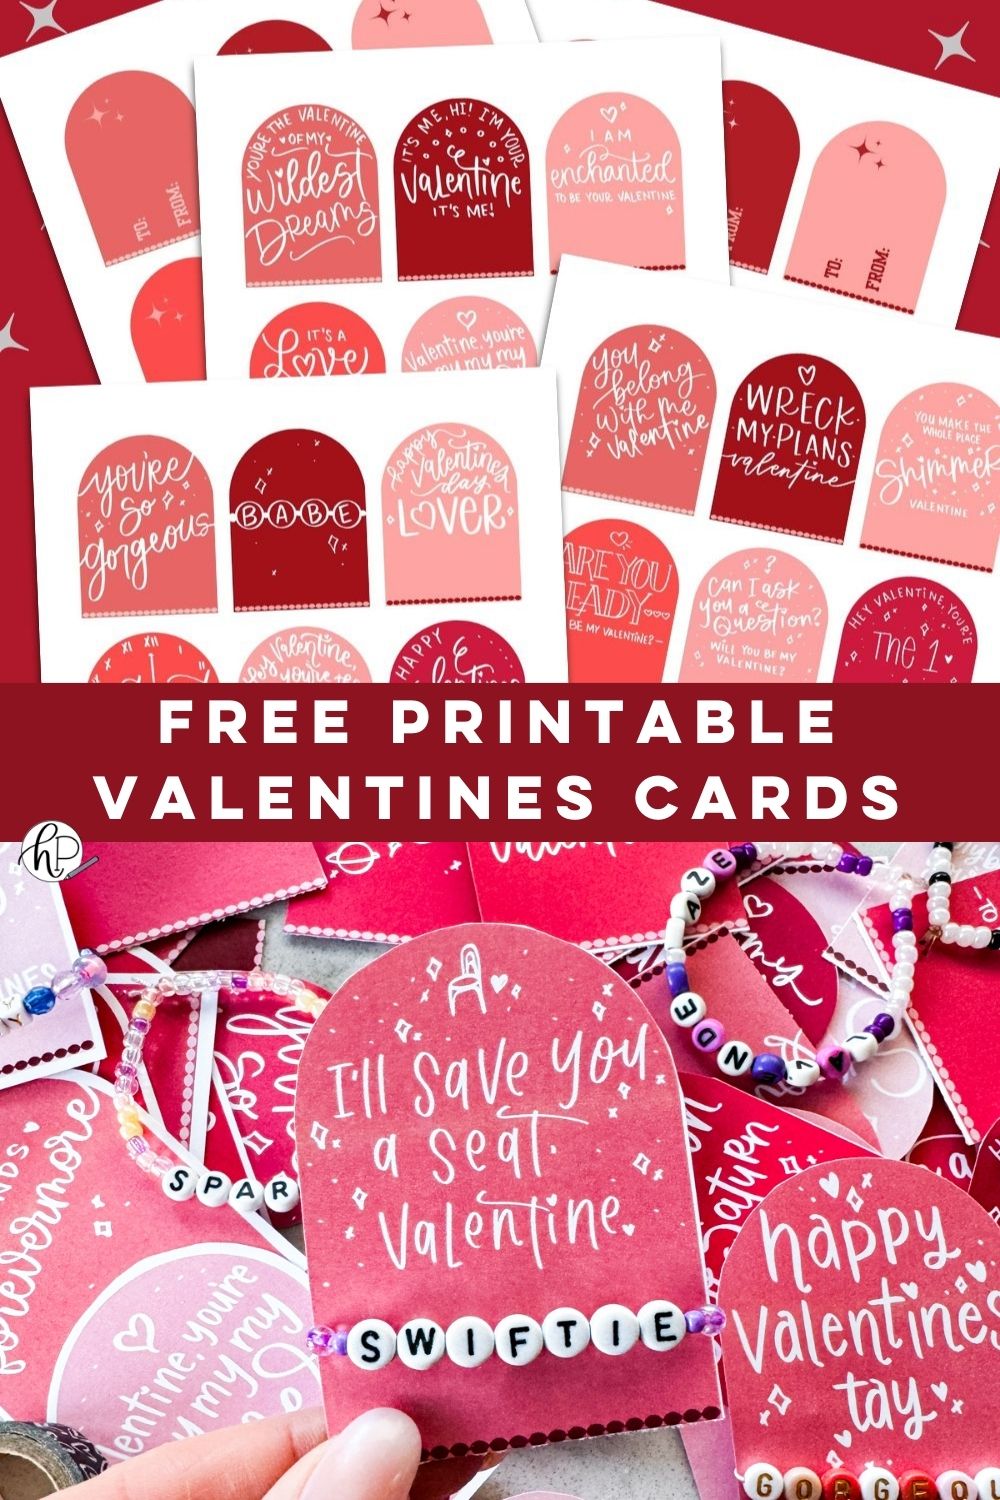 text reads: free printable valentines cards two images stacked, top image shows all 27 free printable taylor swift valentines cards, full sheets not cut to size on red background bottom image shows valentines cut to size with beaded friendship bracelets. held valentine reads 'ill save you a seat, valentine' with a 'swiftie' bracelet